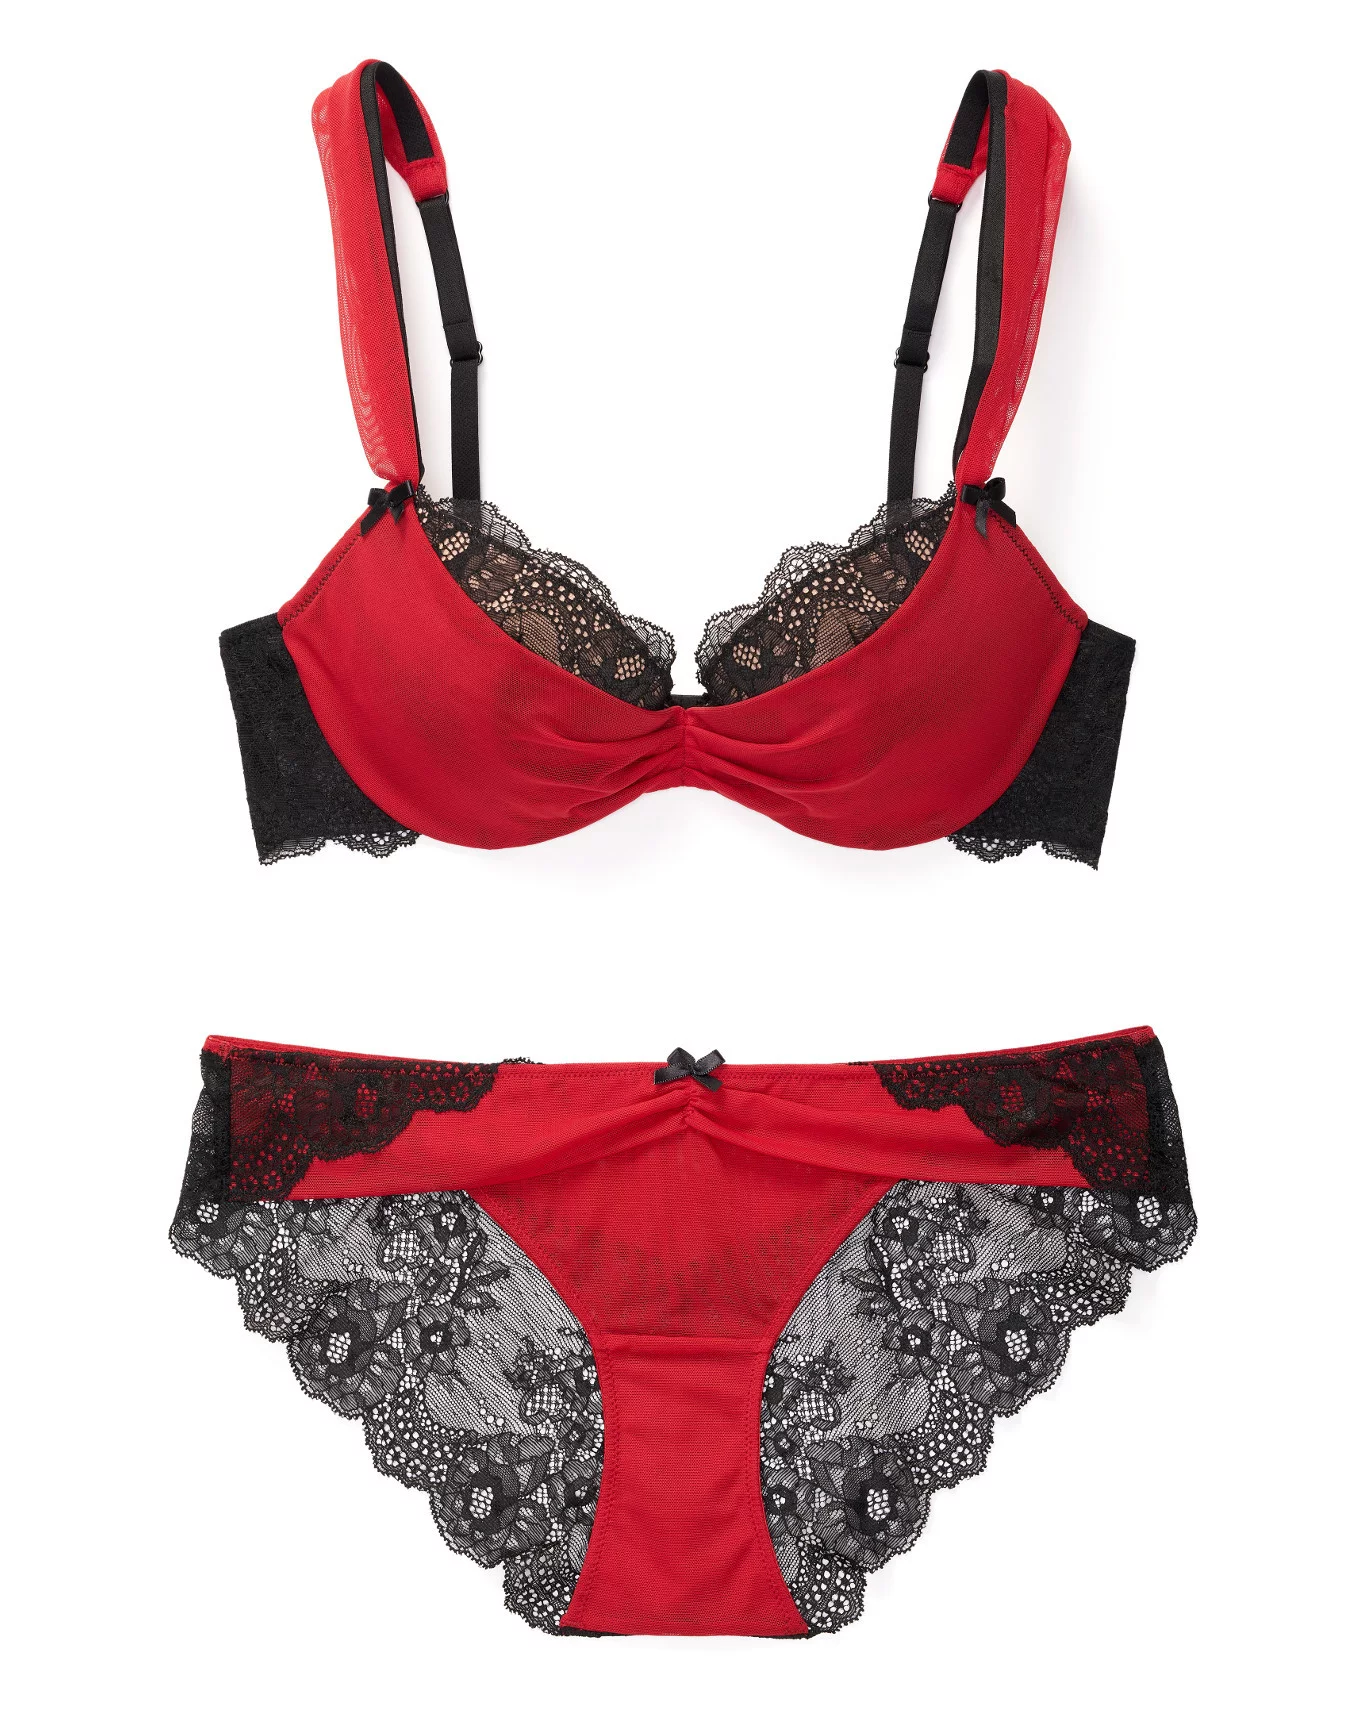 Women's Red Strappy Lace Bralette High Waist Lace Up Panty Set